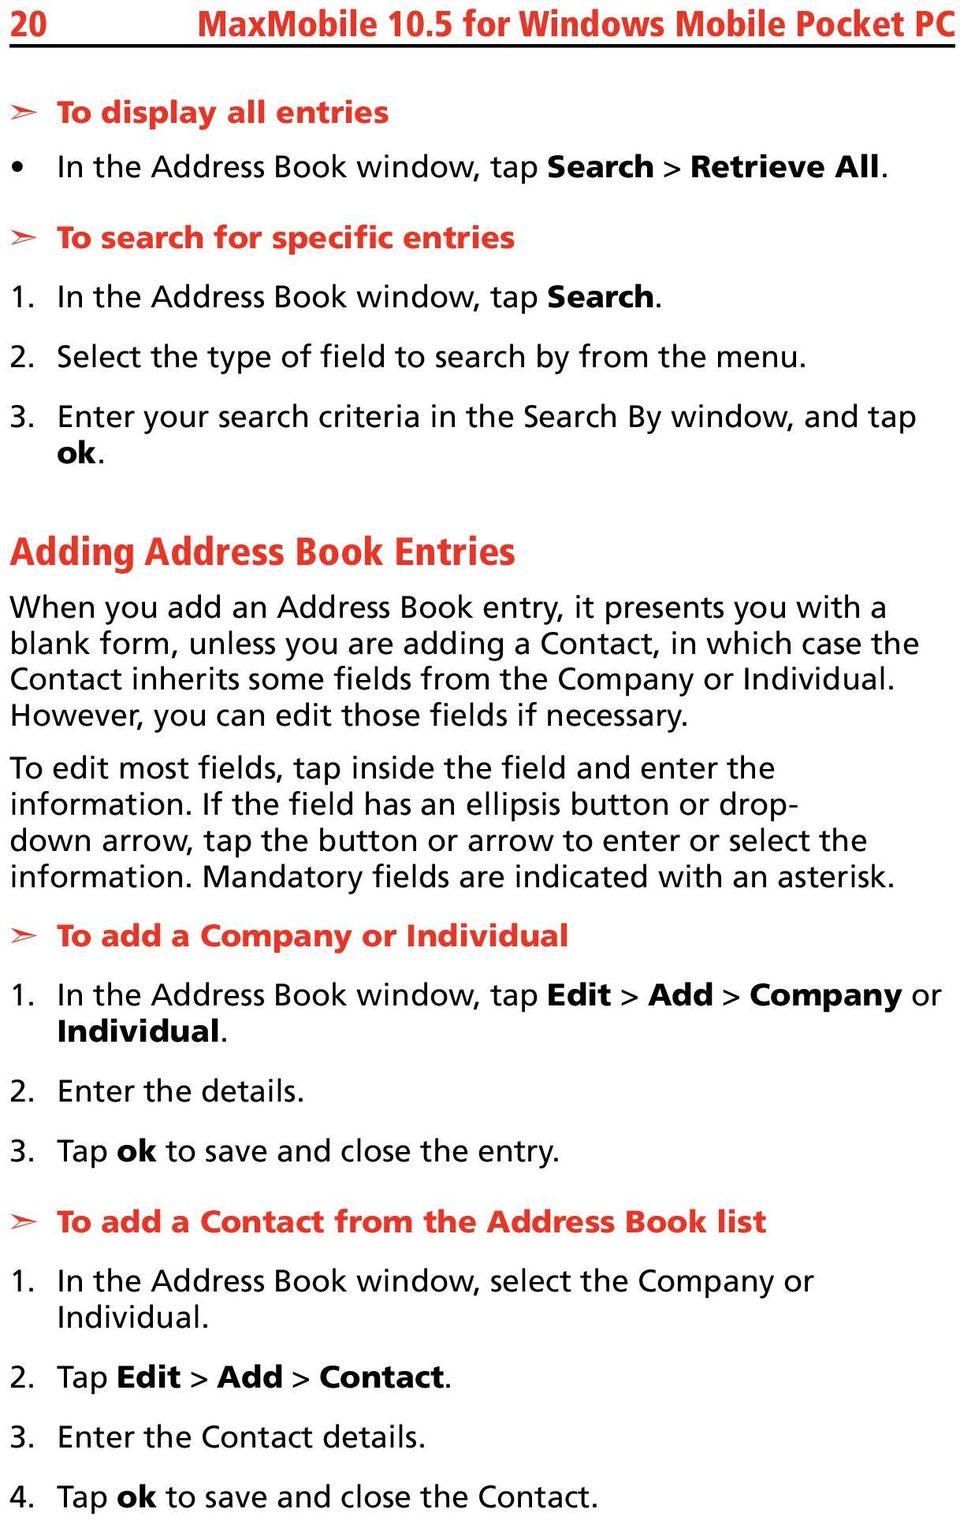 Adding Address Book Entries When you add an Address Book entry, it presents you with a blank form, unless you are adding a Contact, in which case the Contact inherits some fields from the Company or